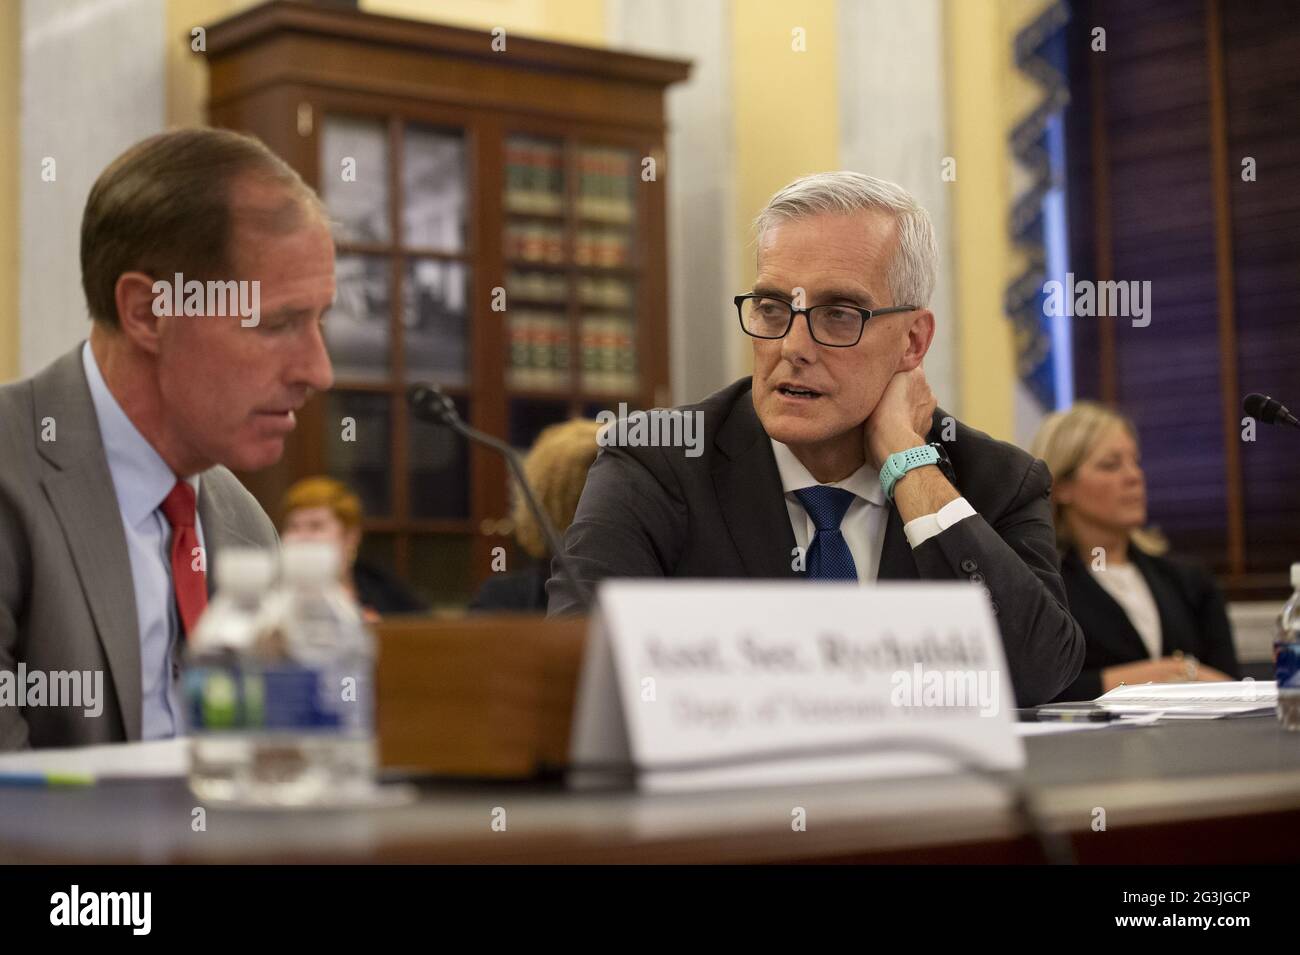 Washington, United States. 16th June, 2021. United States Secretary of Veterans Affairs Denis McDonough and Assistant Veterans Affairs Secretary for Management and Chief Financial Officer Jon Rychalski speak before a Senate Committee on Veterans Affairs hearing on the Department of Veteran's Affairs budget for fiscal year 2022 in Washington, DC., on Wednesday, June 16, 2021. Photo by Bonnie Cash/UPI. Credit: UPI/Alamy Live News Stock Photo